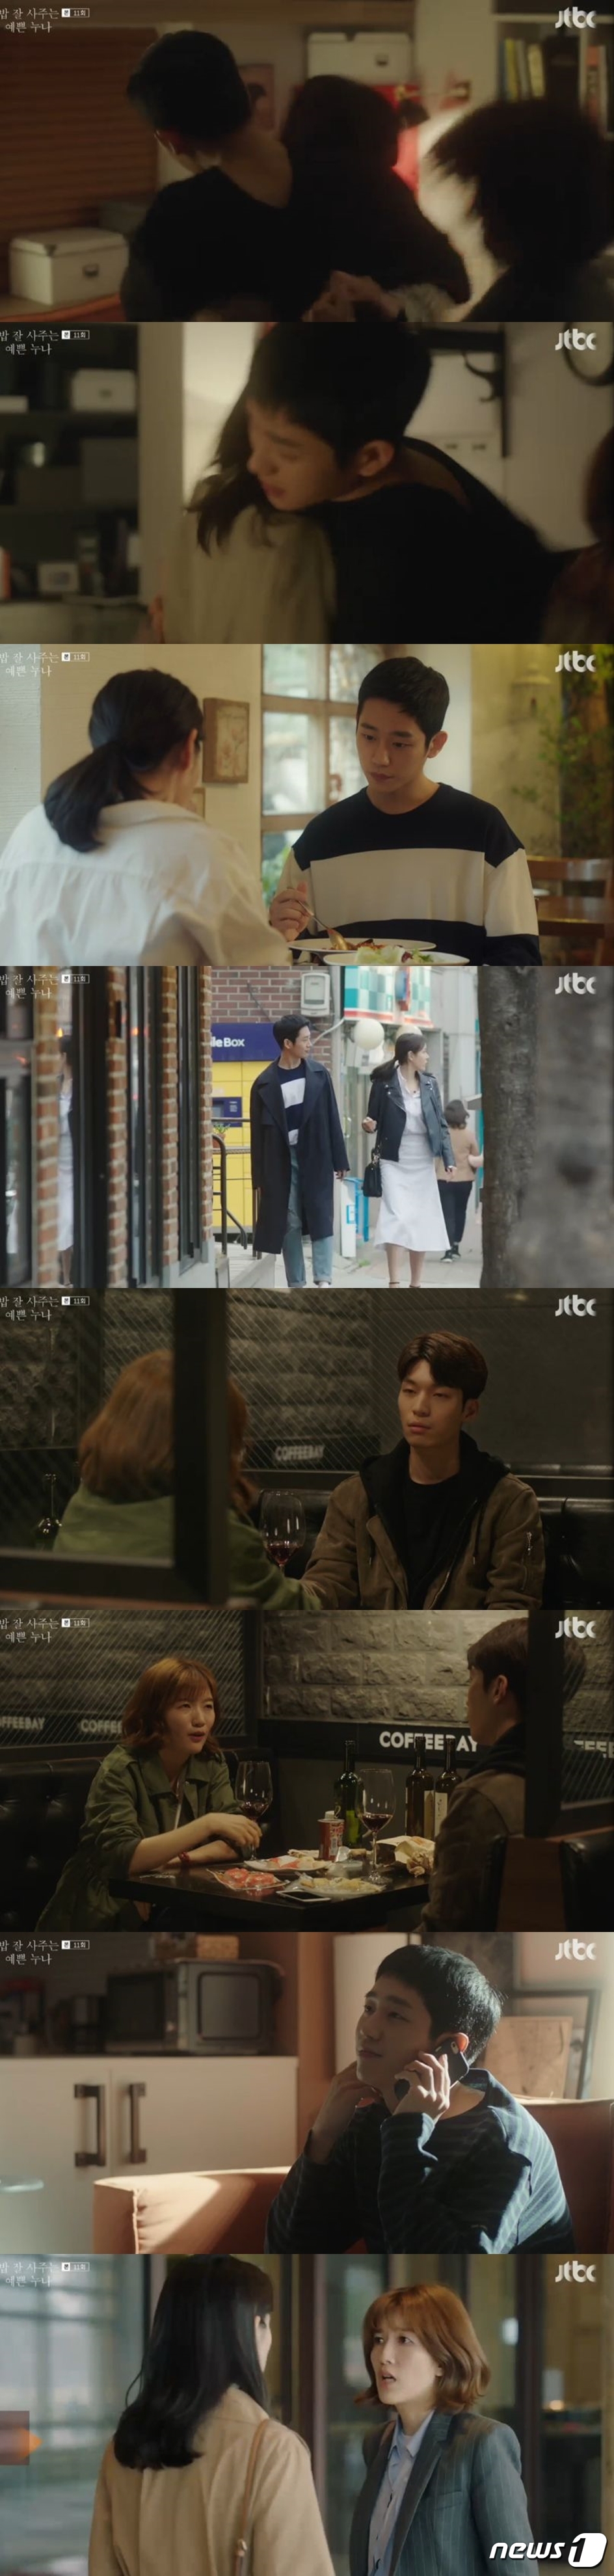 Seoul =) = A red light was lit on the love front of Son Ye-jin and Jung Hae In couple of Bob-buying pretty sister.On the 4th broadcast JTBC Drama Bob Good Sister, Yoon Jin-ah (Son Ye-jin), Seo Jun-hee (Jung Hae In), and Kim Mi-yeon (Gil Hae-yeon) were shown conflicting at Seo Jun-hees house.Seo Jun-hee informed Yun Jin-ah when Kim Mi-yeon came to visit Without trying to persuade Kim Mi-yeon to face him.Seo Jun-hee said: I wont open the door. Ill send you home right away. I did everything wrong. Youll hurt me now.Please close your eyes once. Mi-yeon said, Do you wrap Jin-ah in front of me now?Kim Mi-yeon, who had been hiding since Yoon Jin-a headed home, came into the house of Seo Jun-hee.Kim Mi-yeon slapped Seo Jun-hee, who kneeled as soon as he came in, and said, You know how much I care about your brother and sister, where is anyone who lives without making mistakes?I have encouraged you to change your mind now, but Seo Jun-hee said, I have never made a mistake to meet my sister. Kim Mi-yeon said, Lets look a little farther.We are no different from family, said Jina, who is full of the future, but Seo Jun-hee replied firmly, Its just a normal male woman meeting.Mi-yeon said, Yes, its you, so Ill just say it.I do not care if you think you are looking at my standard, he said. I am worried about Junhee who does not receive the phone call.I was angry; Kim Mi-yeon said, What did you do well? and Yun Jin-a refuted, What did I do wrong?Kim Mi-yeon hit her daughter, but Jun-hee wrapped her whole body around her, and Yun Jin-ah had to be embarrassed by the video of inappropriate contact with her boss at the karaoke room.The image in the video could have been a victim, but the seniors and colleagues who saw it misunderstood Yun Jin-ahs behavior.Seo Jun-hee also had to work from his company colleagues with a pinch saying, What if you are cut off, go crazy, go crazy, have a girlfriend and have nothing to see.The affection of the two people deepened in the midst of the rush.